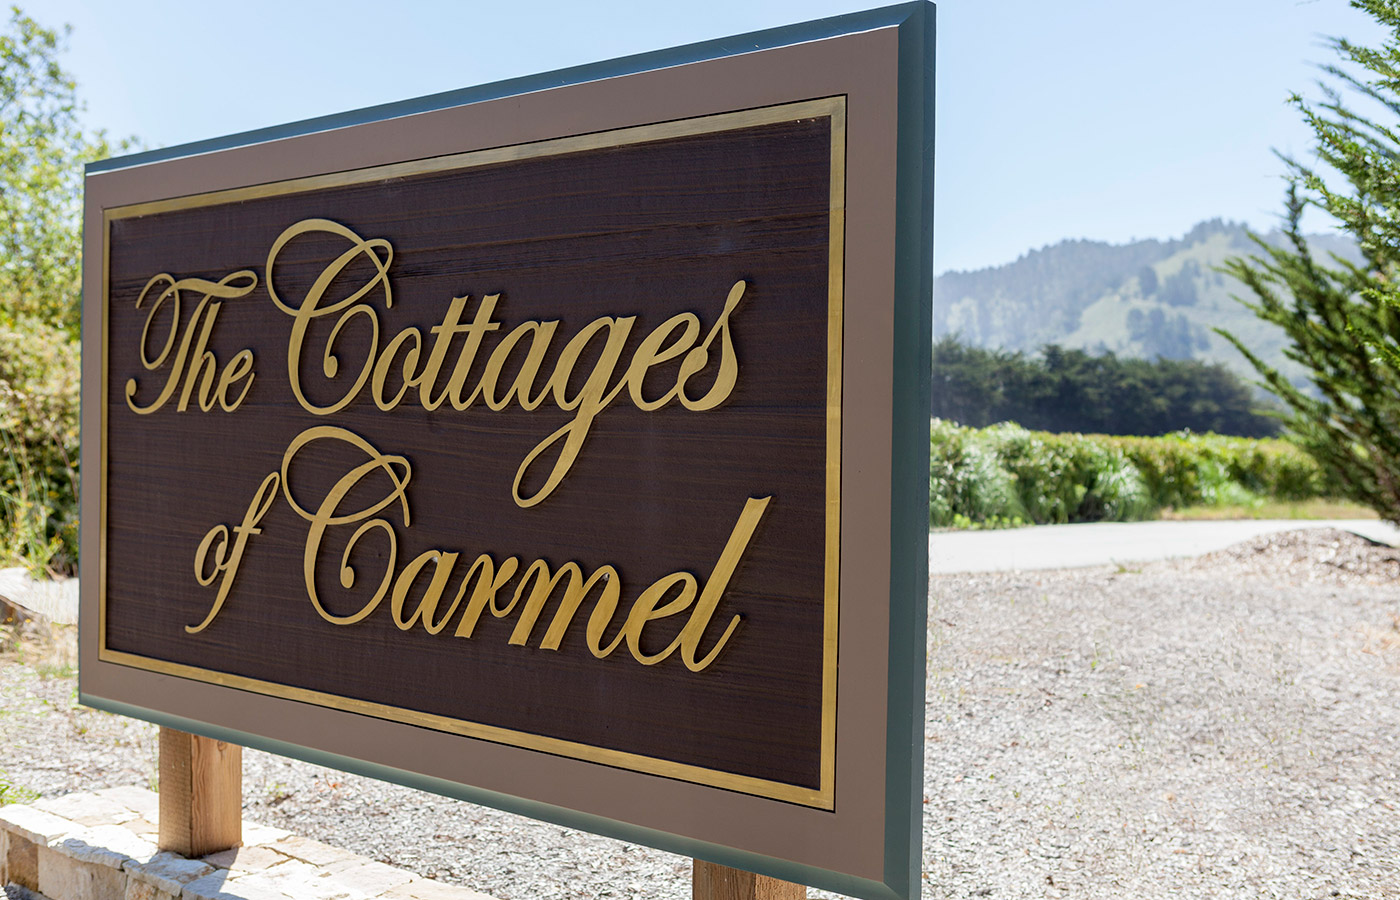 The Cottages of Carmel sign.